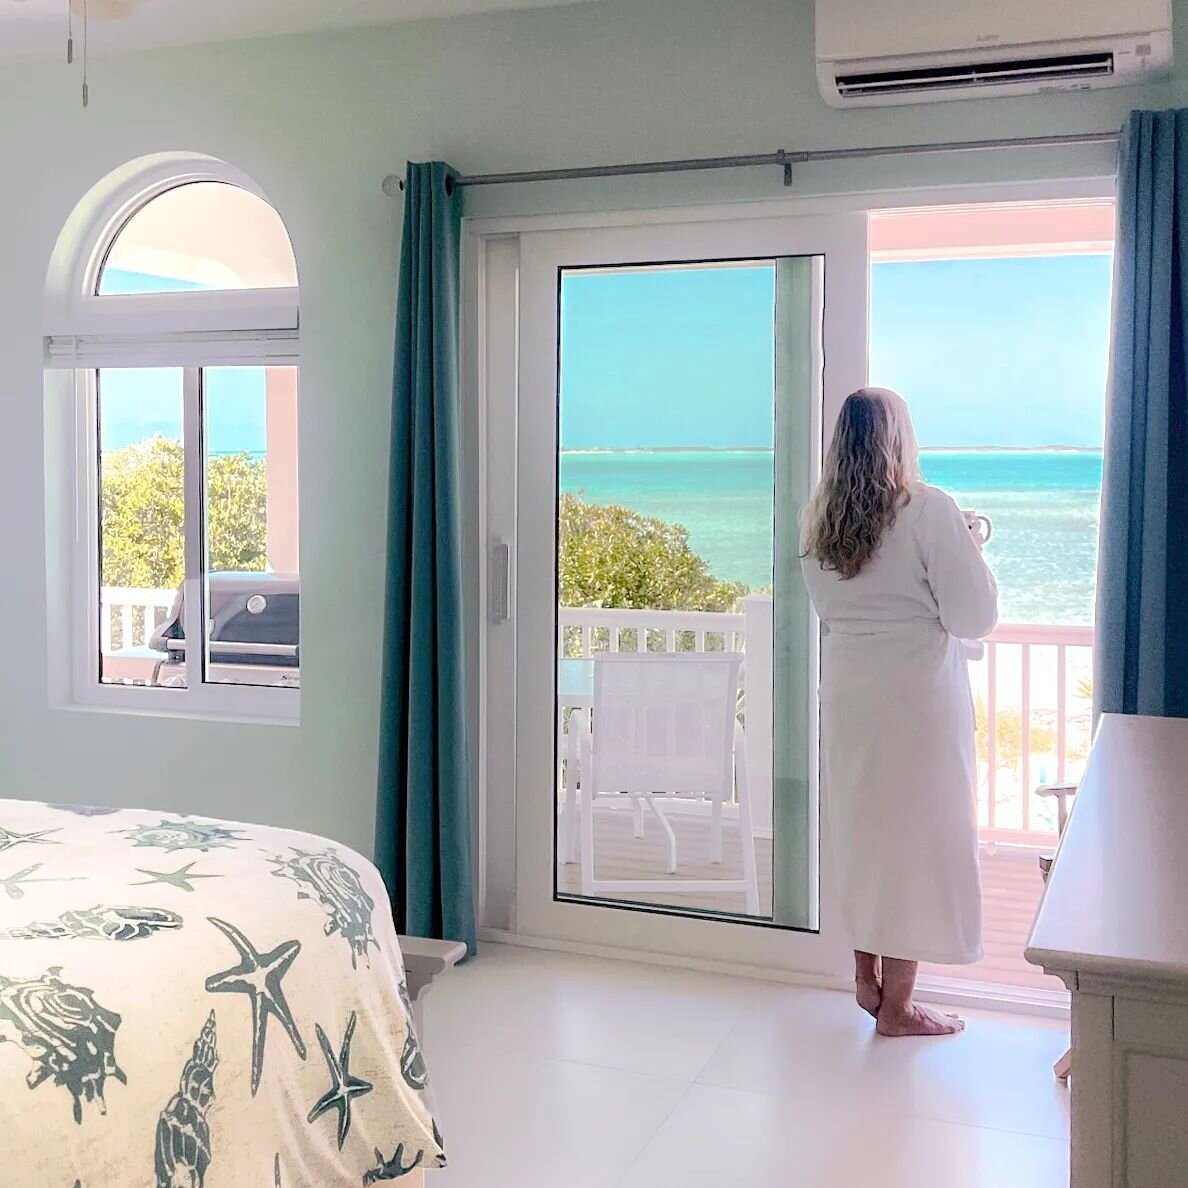 Good morning, #stanielcay! Good morning, #beachvacation! This could be your #wakeupview this summer. Primary bedroom with ensuite bath. 4BR beachfront. See link in bio for availavility calendar, rates and contact form. We can't wait to welcome you!
?